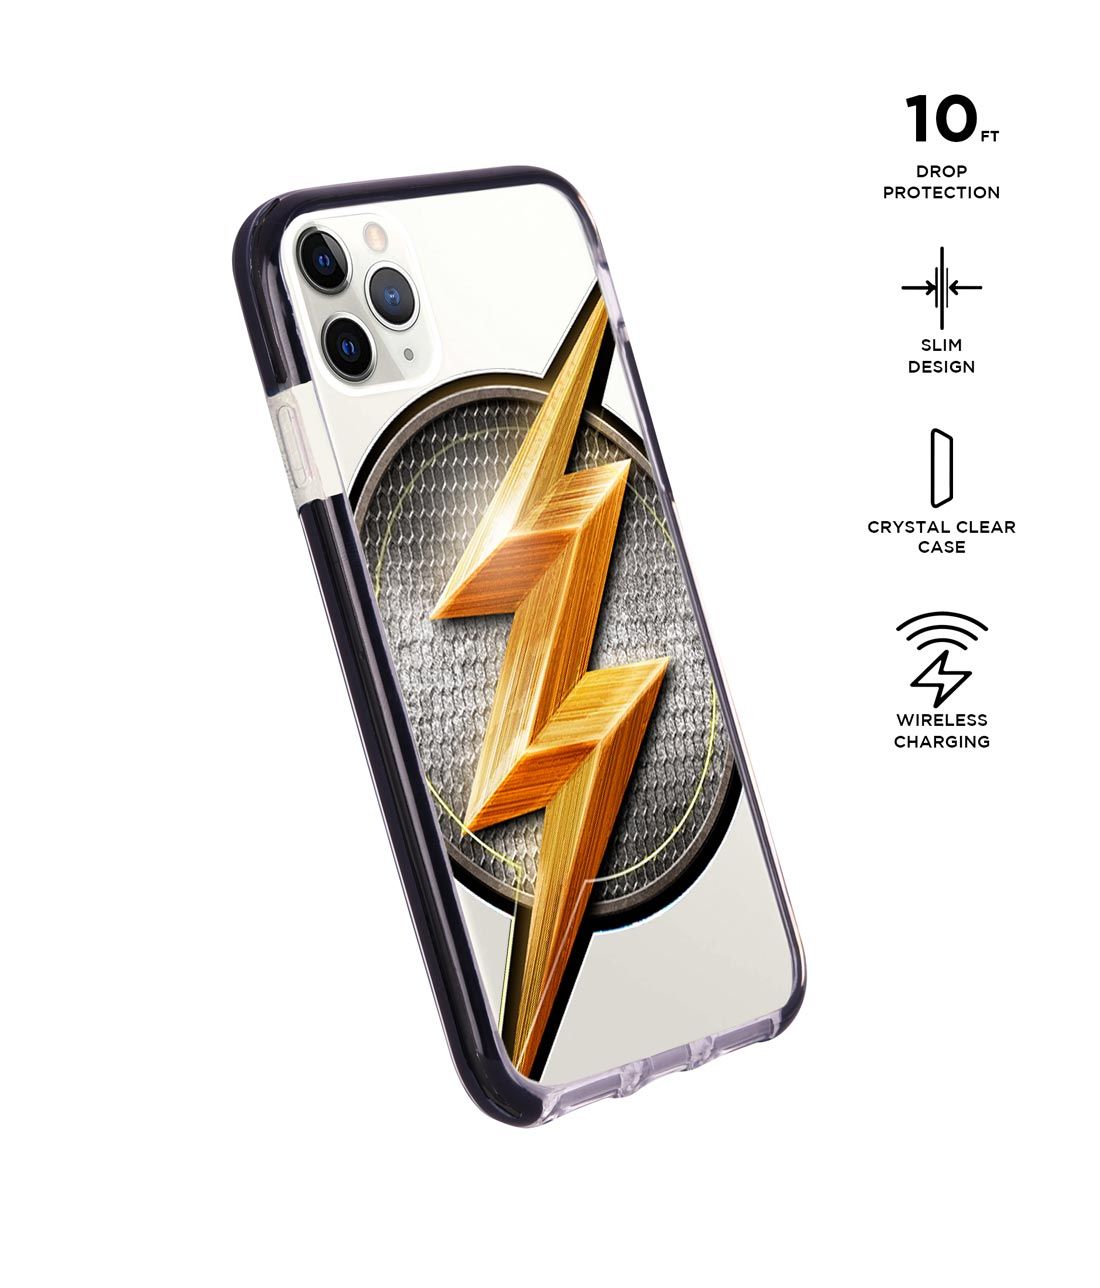 Flash Storm - Extreme Phone Case for iPhone 11 Pro